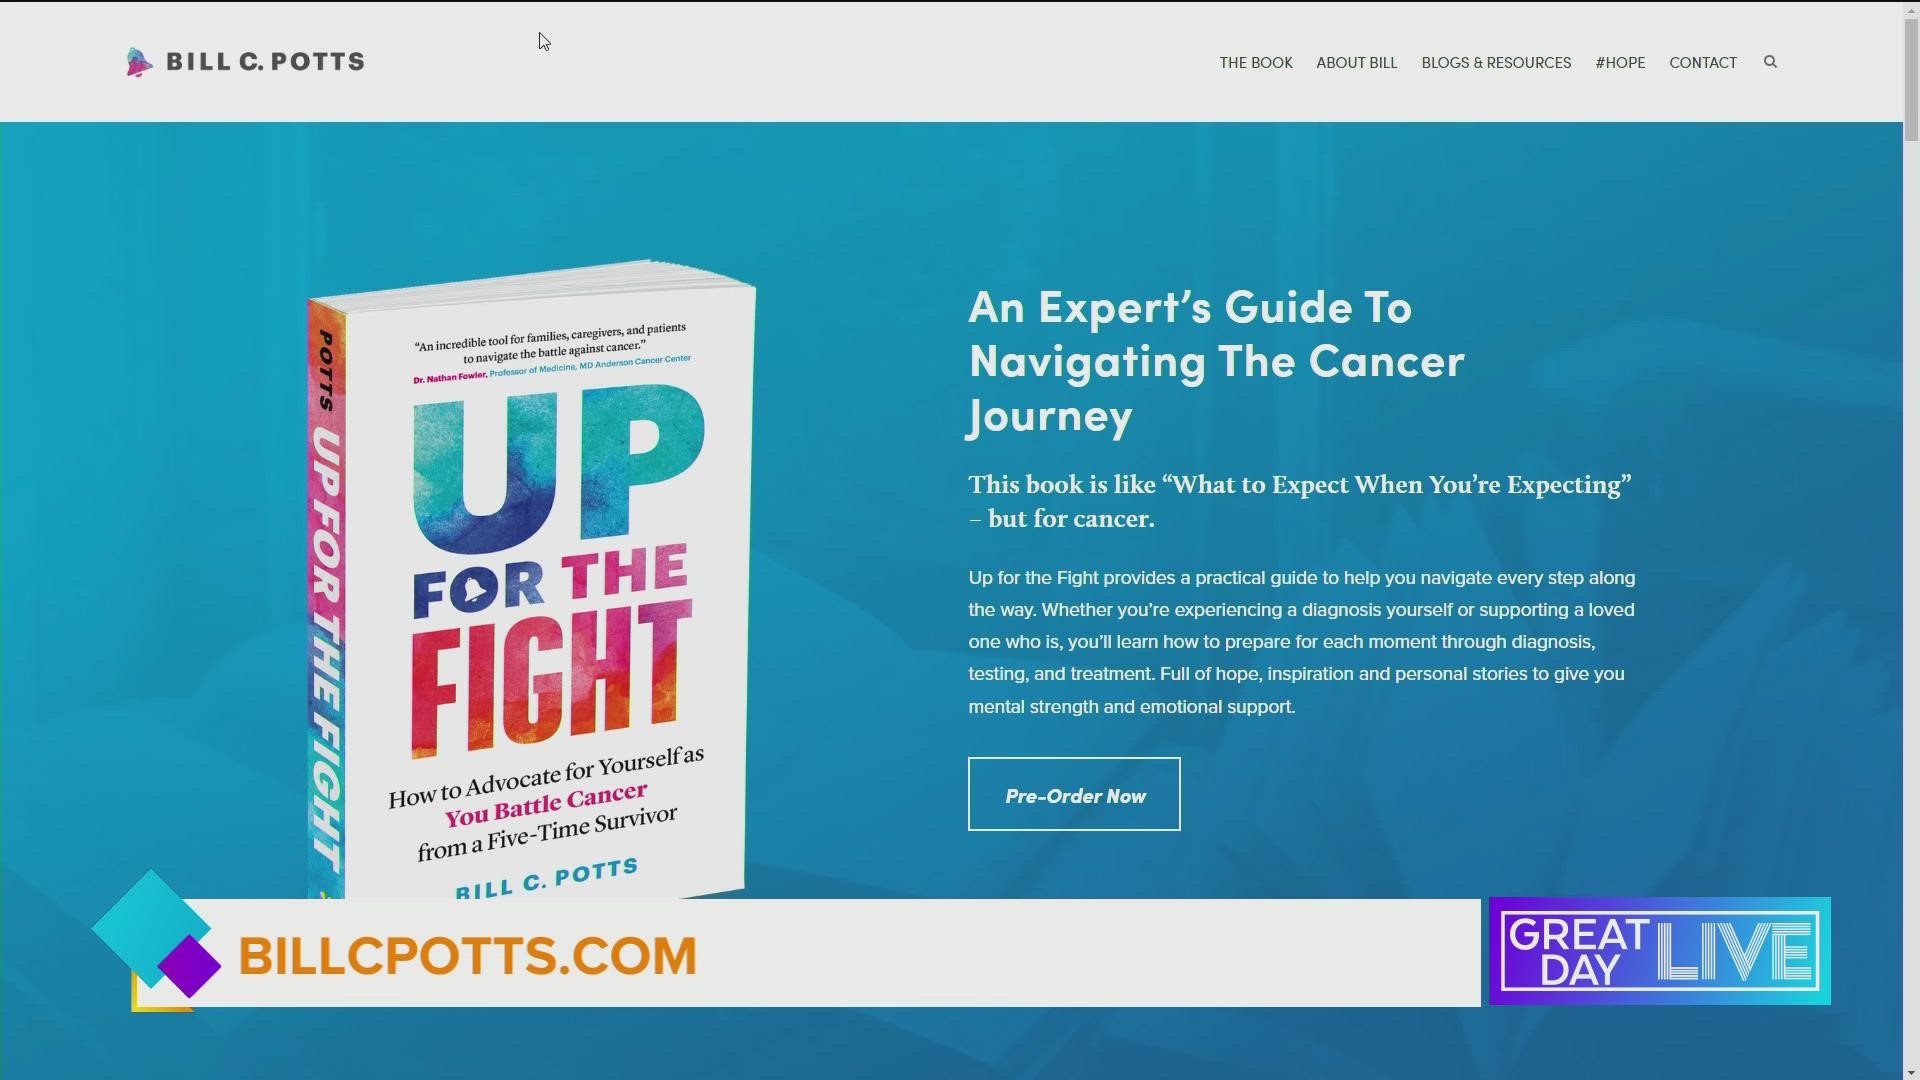 A guide for those fighting cancer